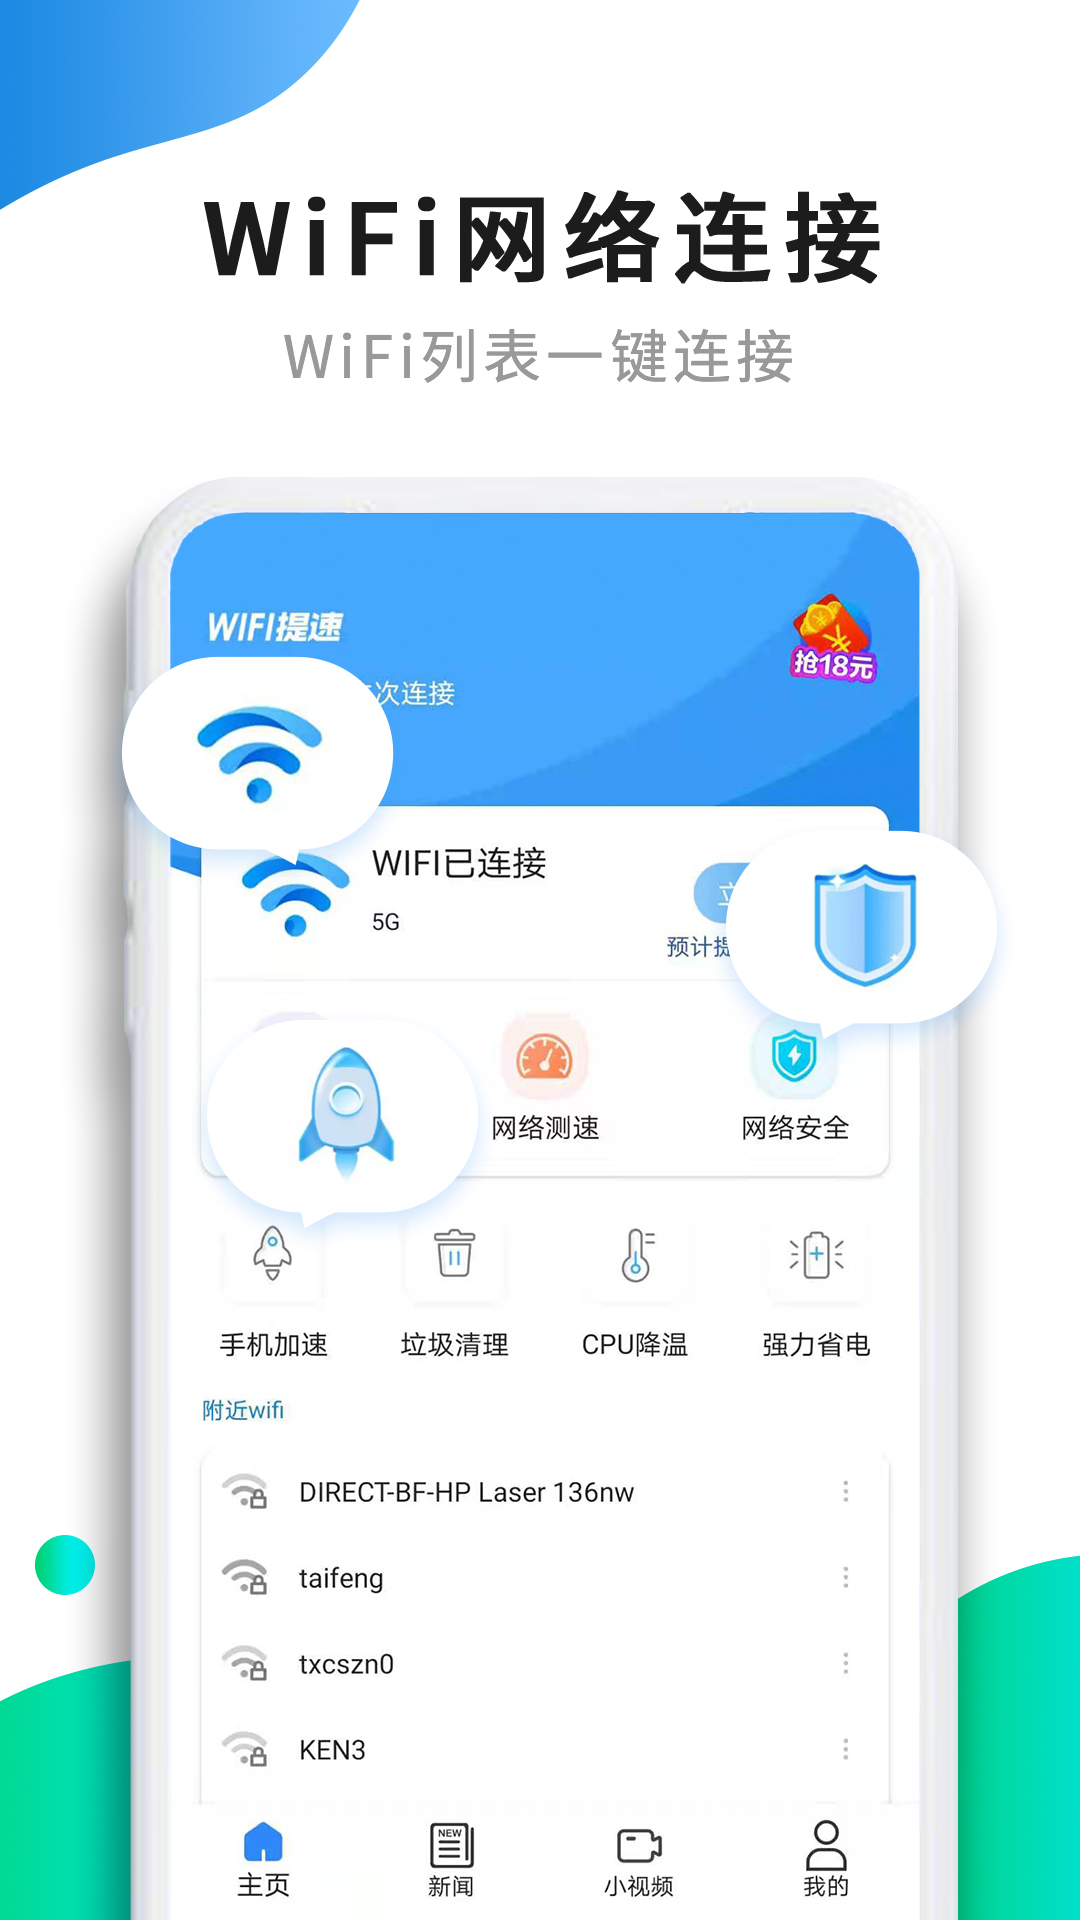 WiFiv1.2.1.8 ׿